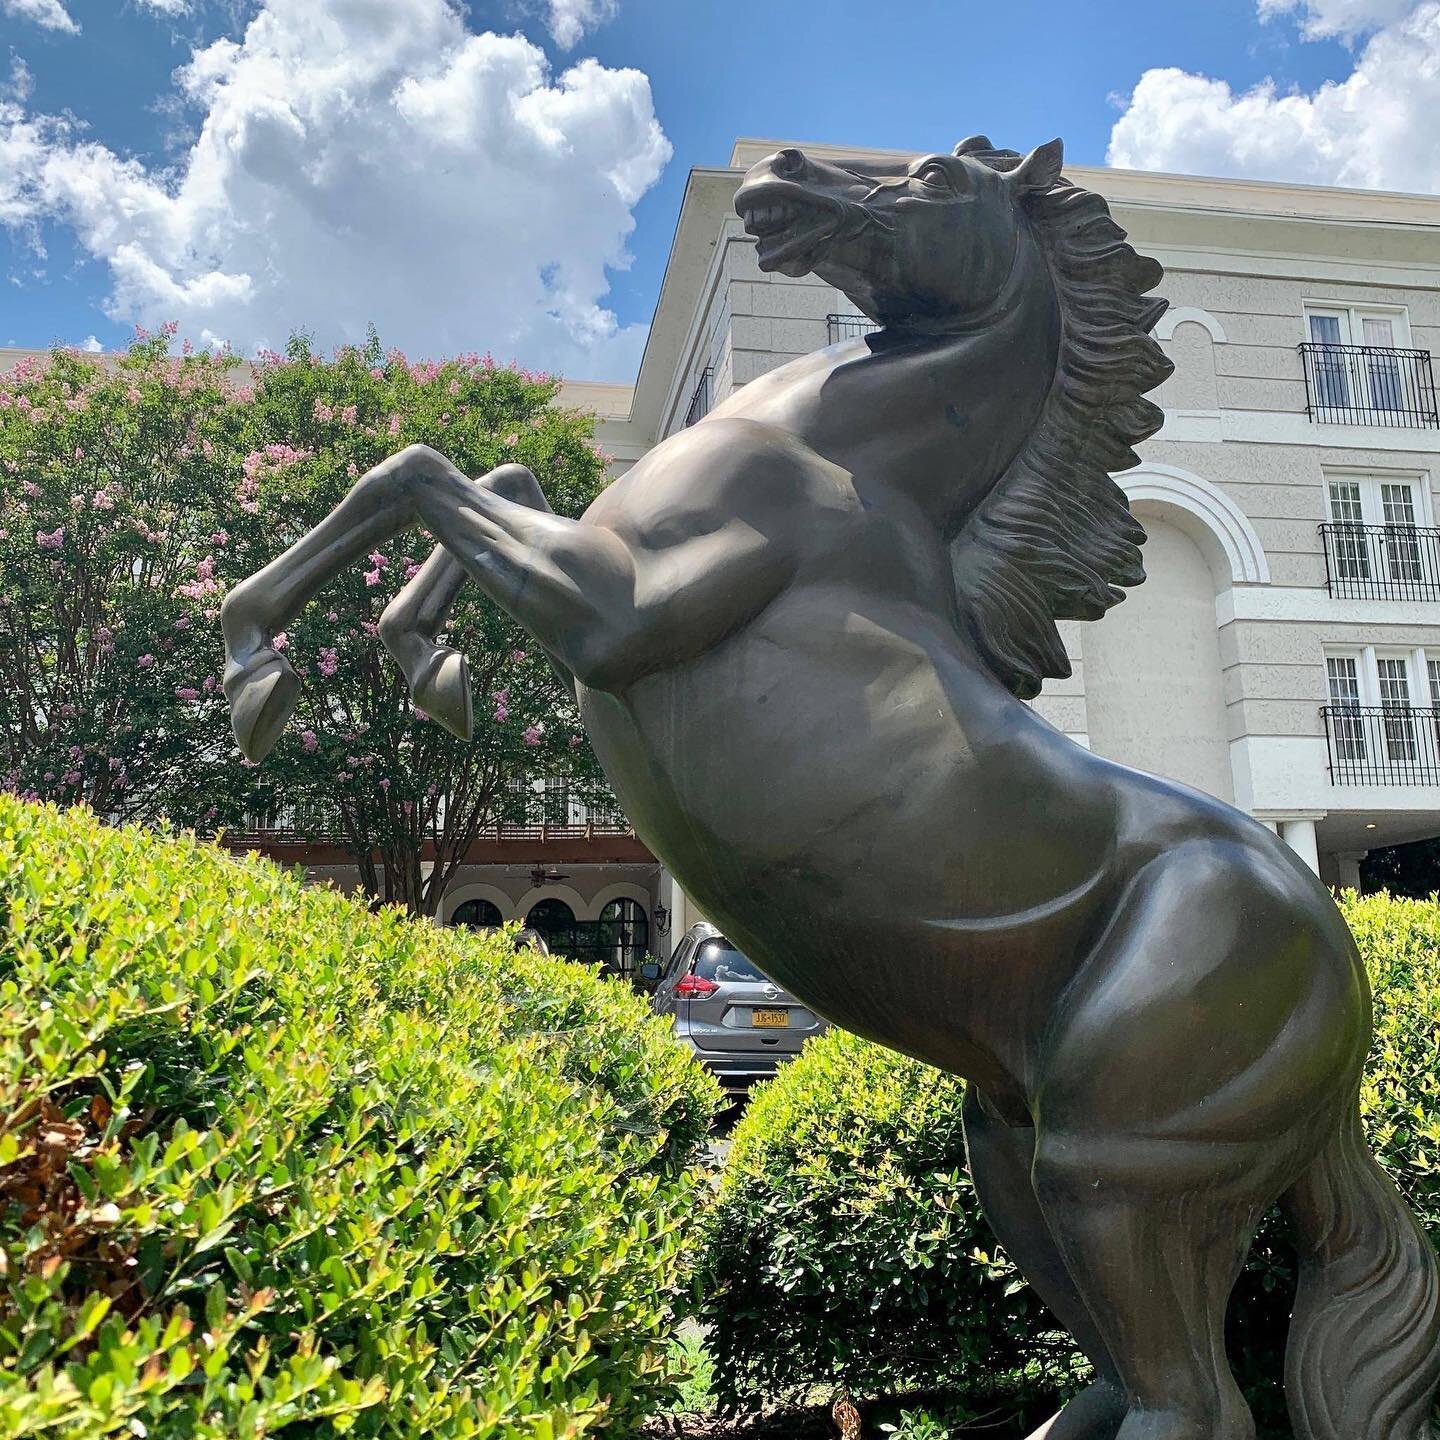 From the Il Palio inspired statue to the beautiful Italian marble lobby, we strive to paint a picture of Italian quality and craftsmanship. 

#thesienahotel #visitnc #visitchapelhill #staycation